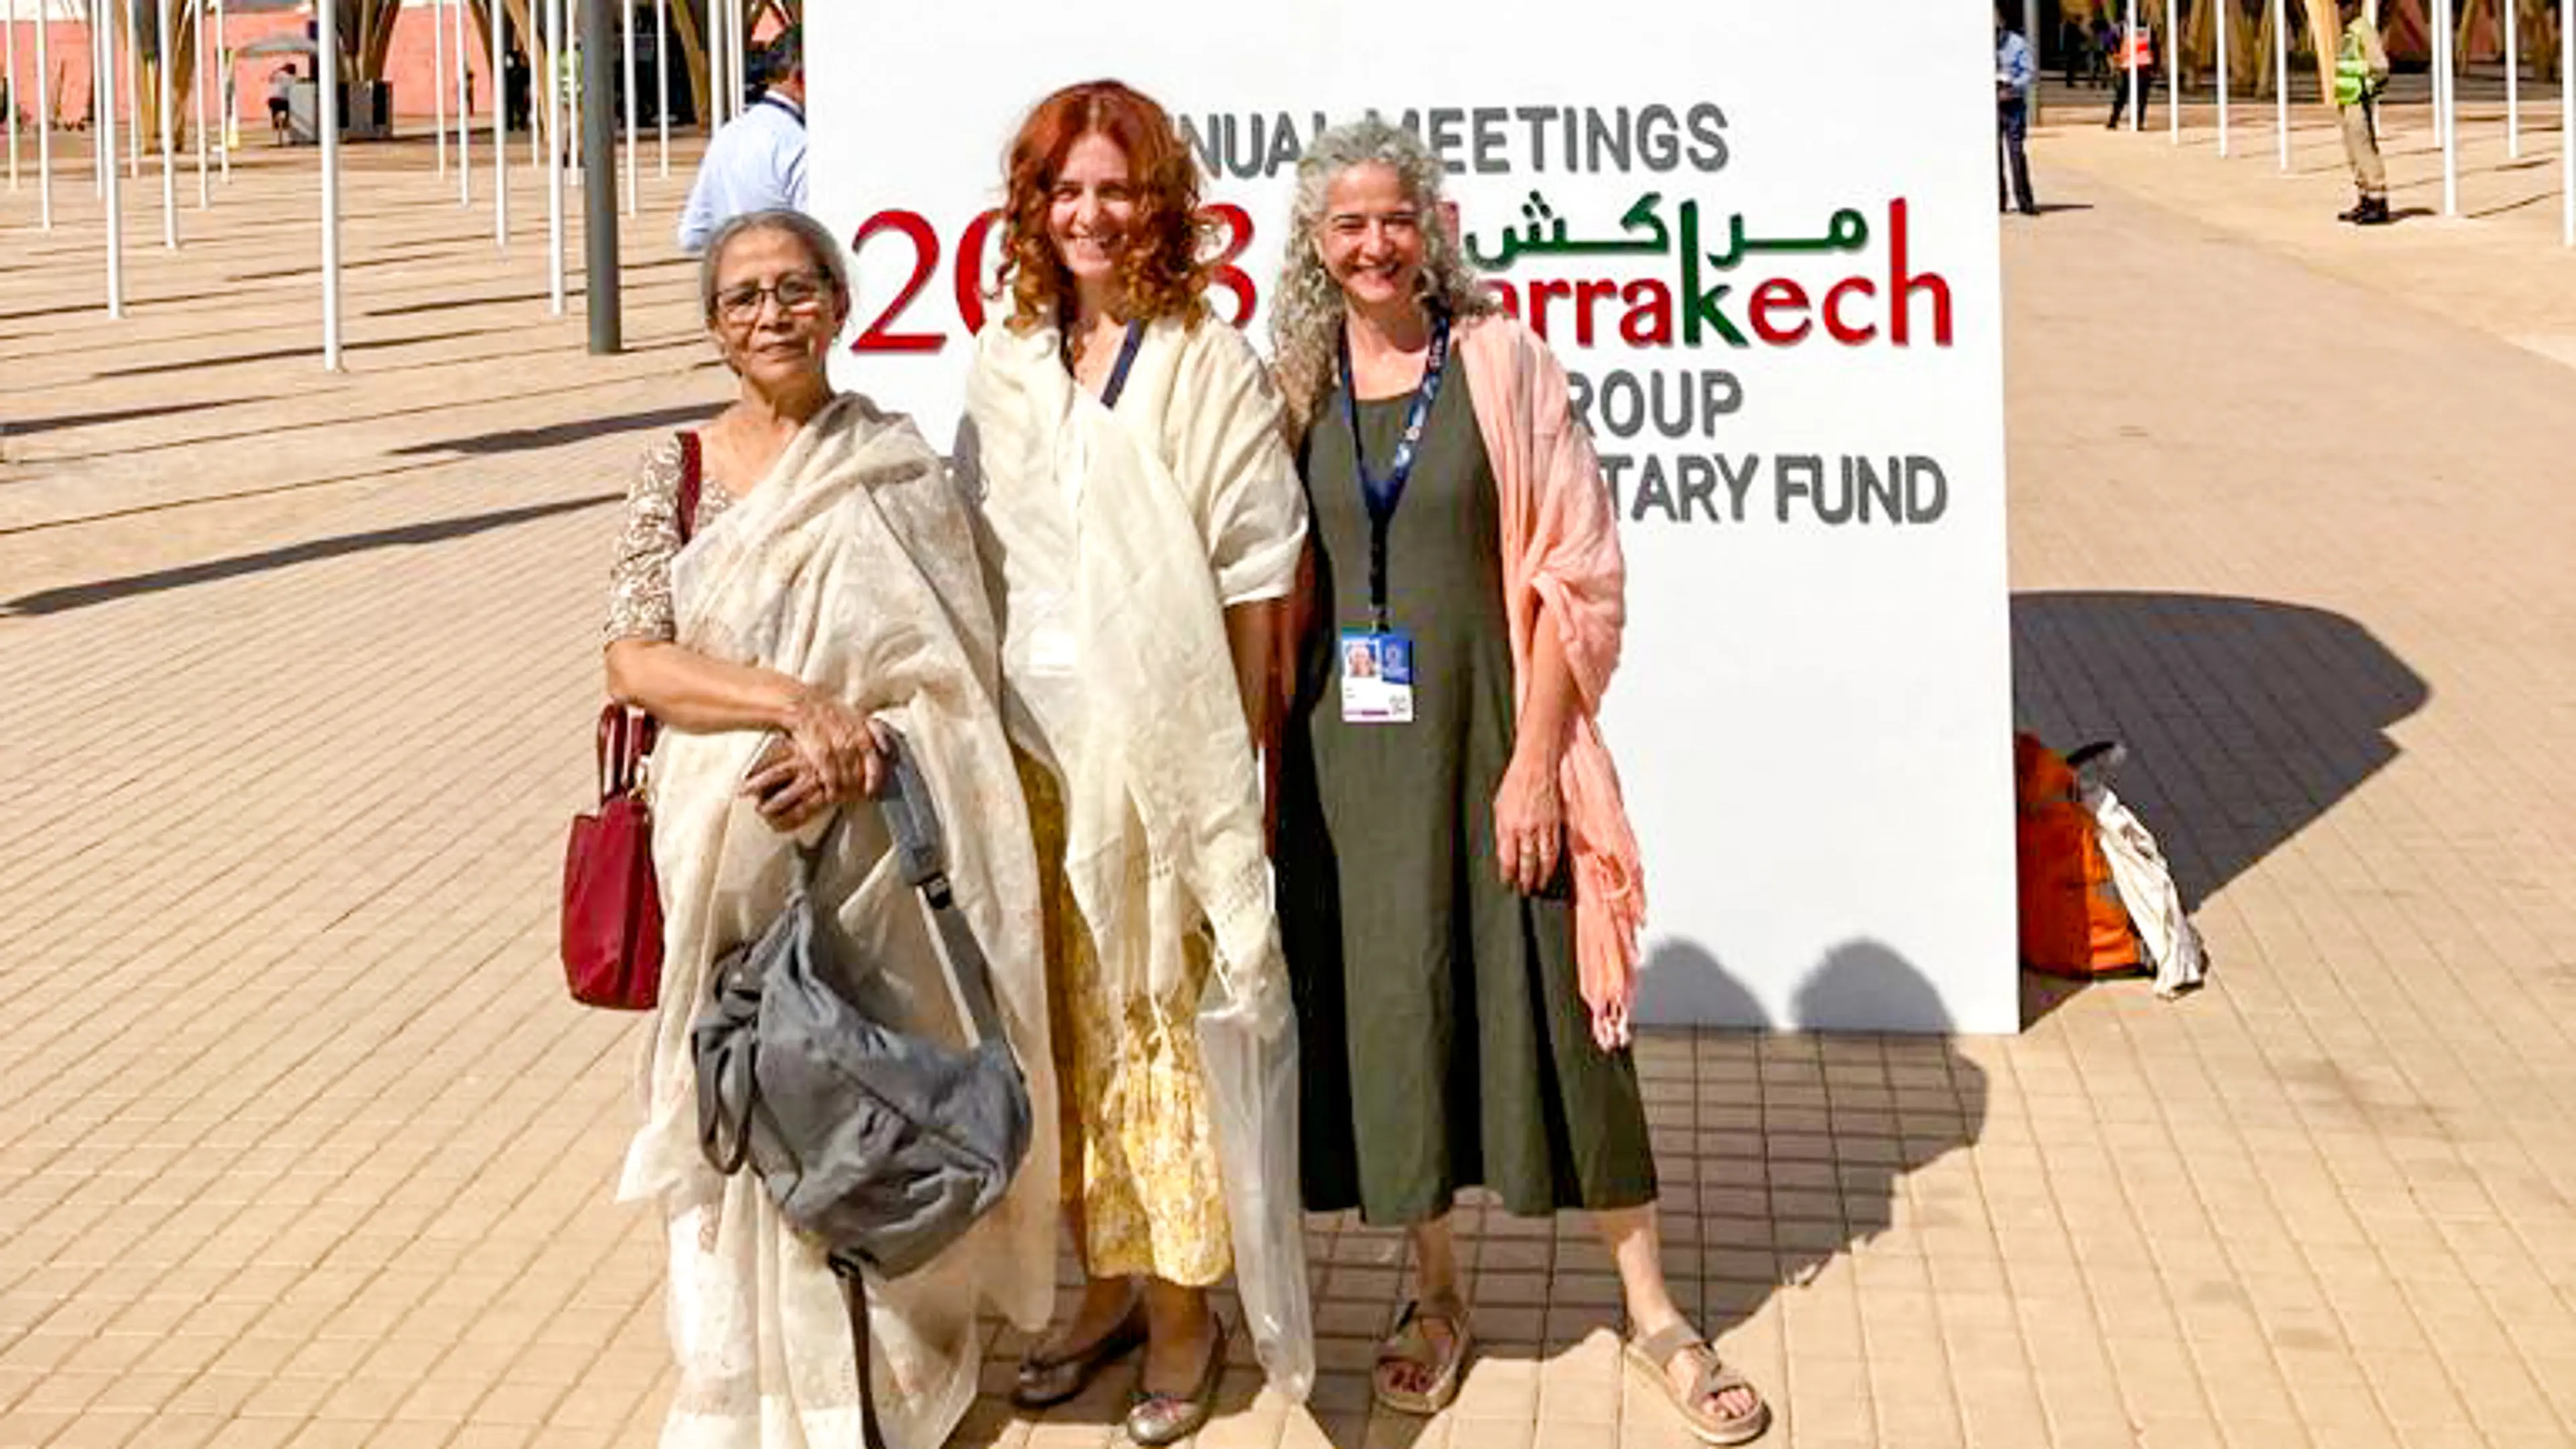 Andrea, Ruth and Farida at the World Bank meetings in Morocco